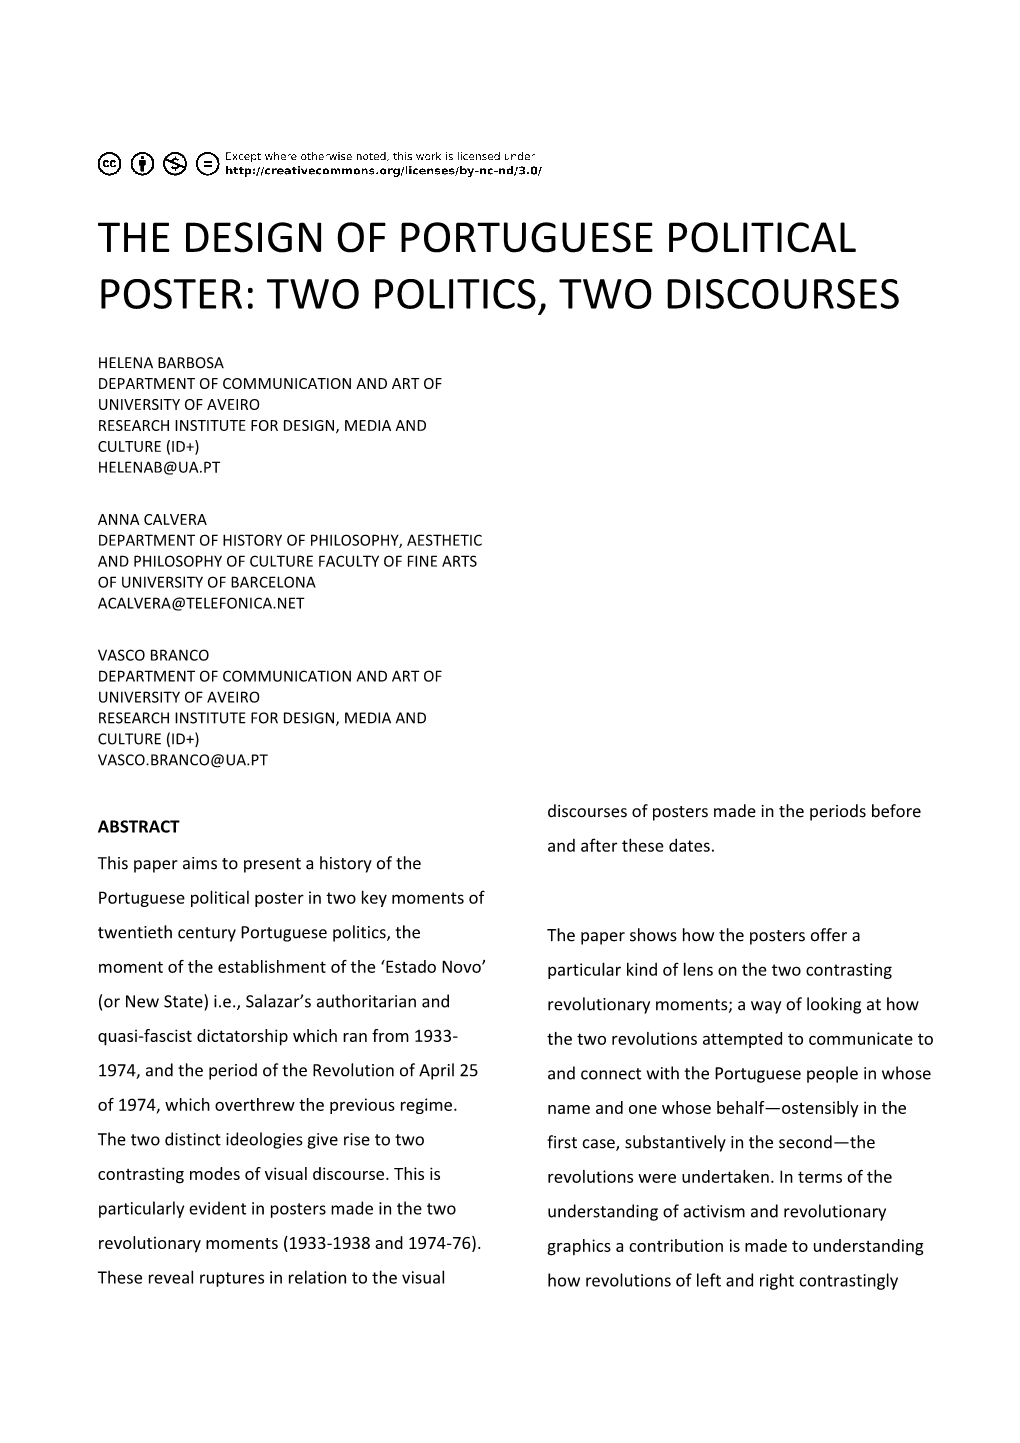 The Design of Portuguese Political Poster: Two Politics, Two Discourses